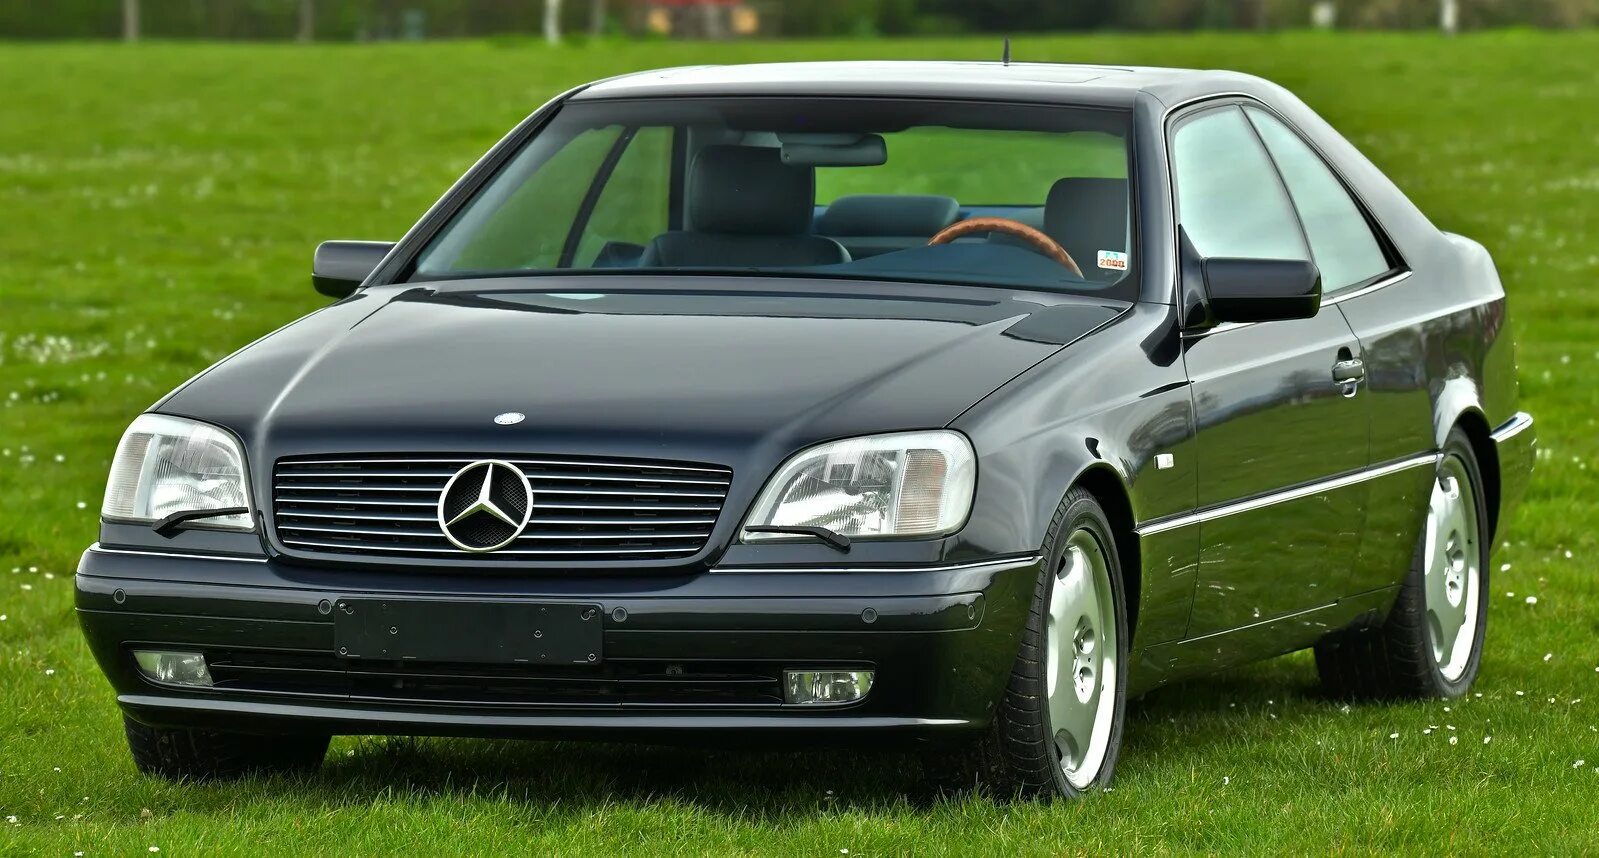 Мерседес 1998 купи. Mercedes cl500 1998. Мерседес CL 1998. Мерседес 1998. Мерседес Бенц CL 1998.